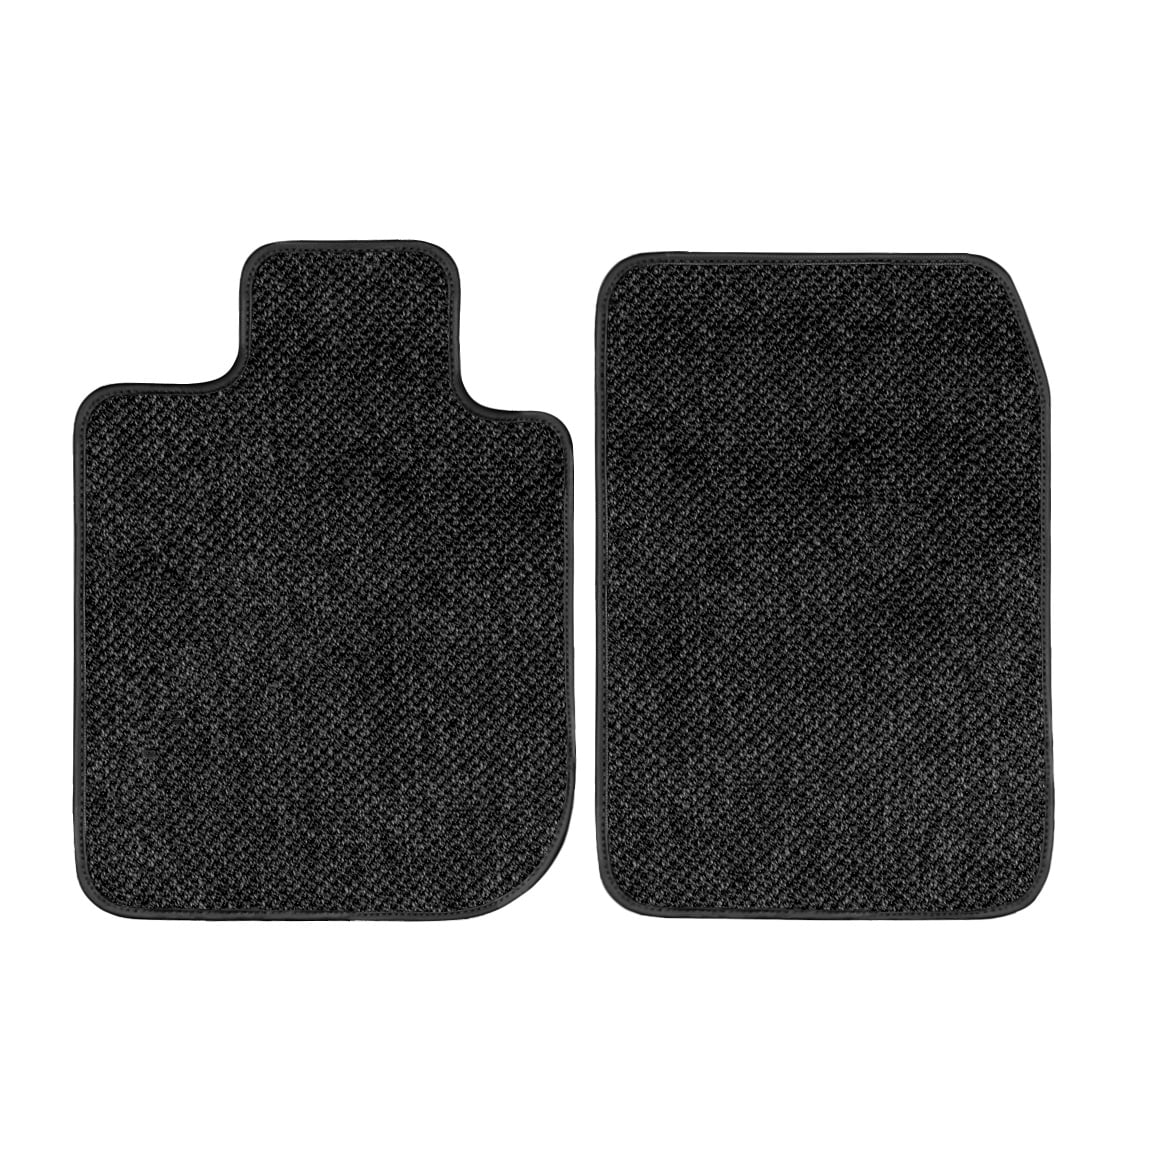 GGBAILEY Grey Loop Driver Passenger & Rear Floor Mats Custom-Fit for Ford F-350 Super Duty Crew Cab 2017-2019 